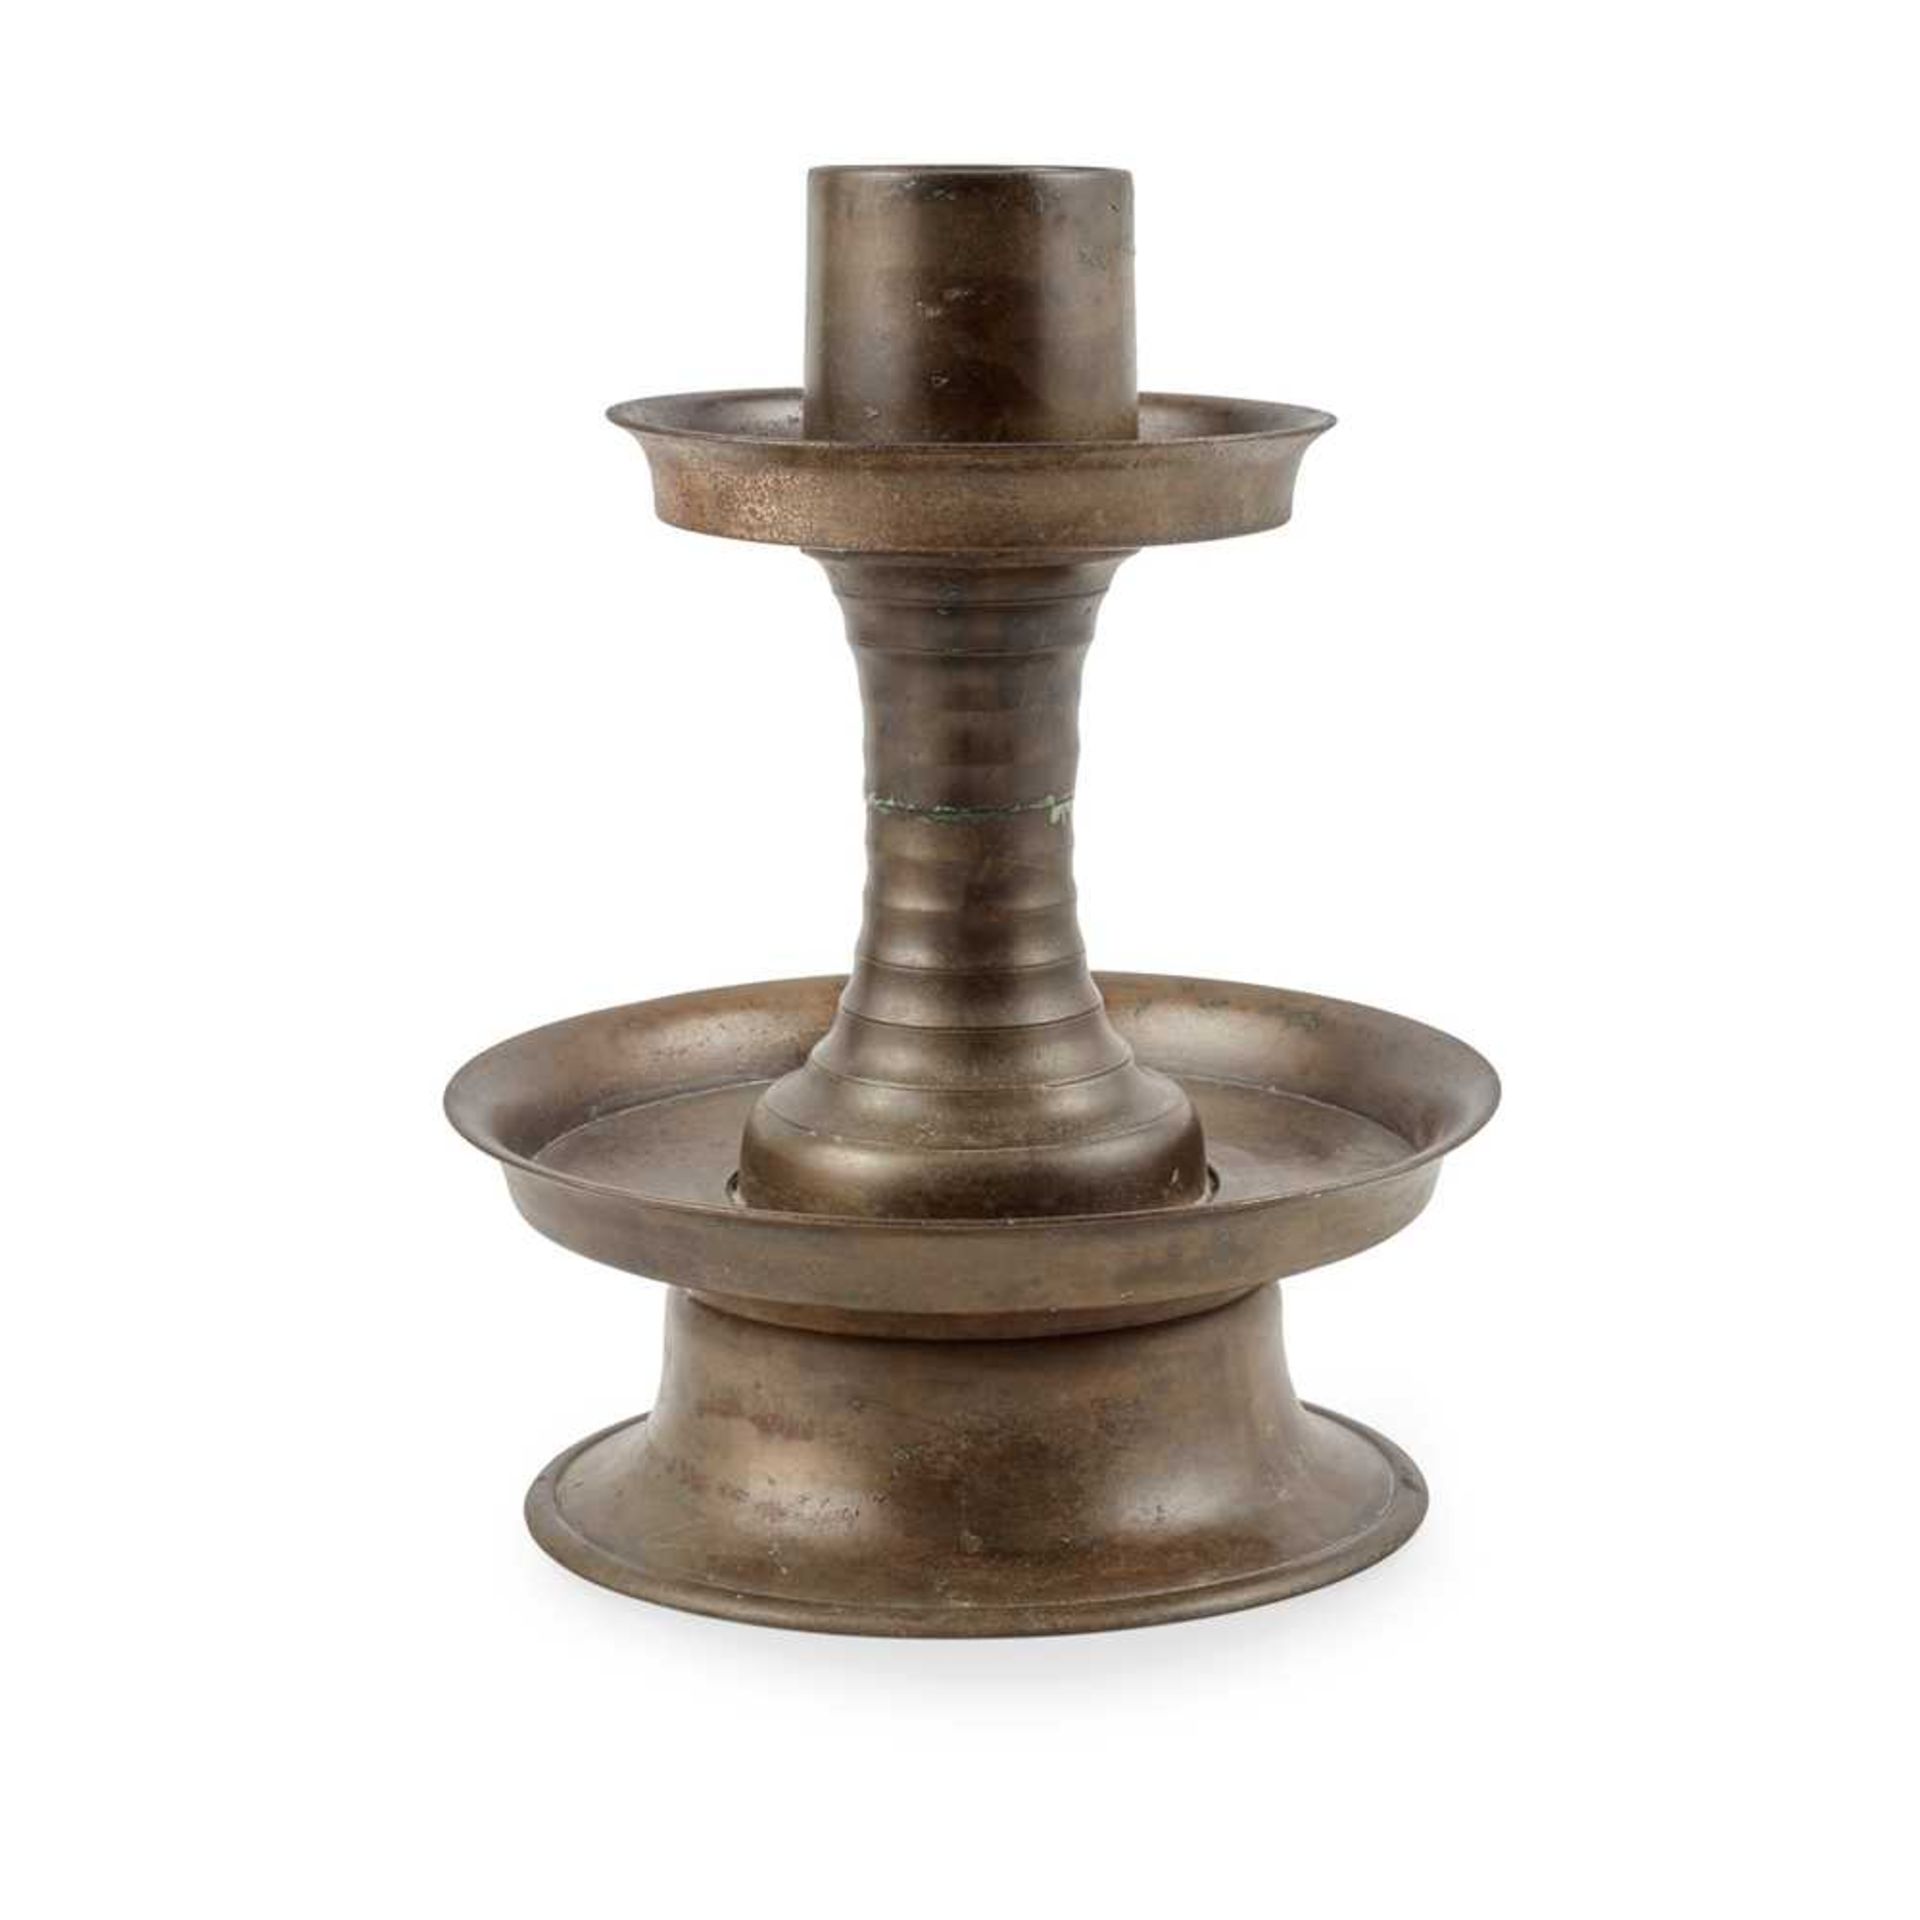 [A PRIVATE SCOTTISH COLLECTION, EDINBURGH] BRONZE CANDLESTICK HOLDER TANG DYNASTY OR LATER